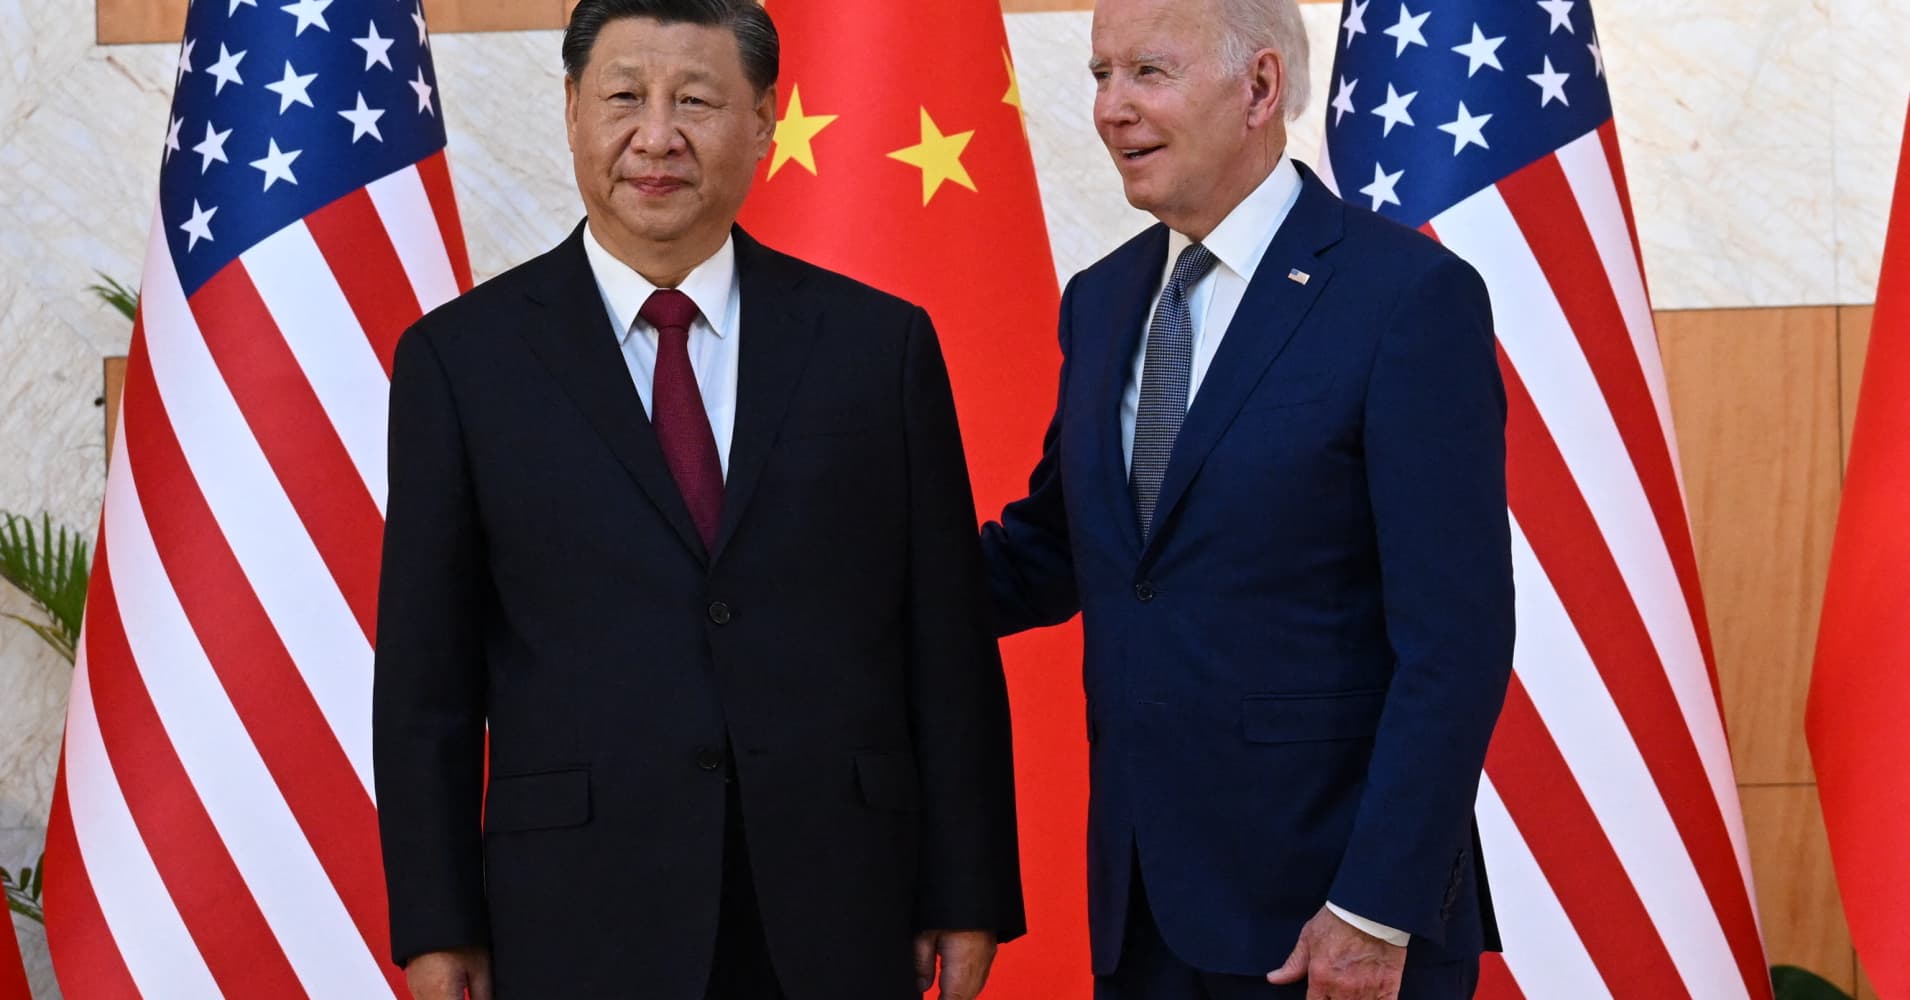 u.s. wins global leadership approval over china when a democrat is president, gallup analysis shows